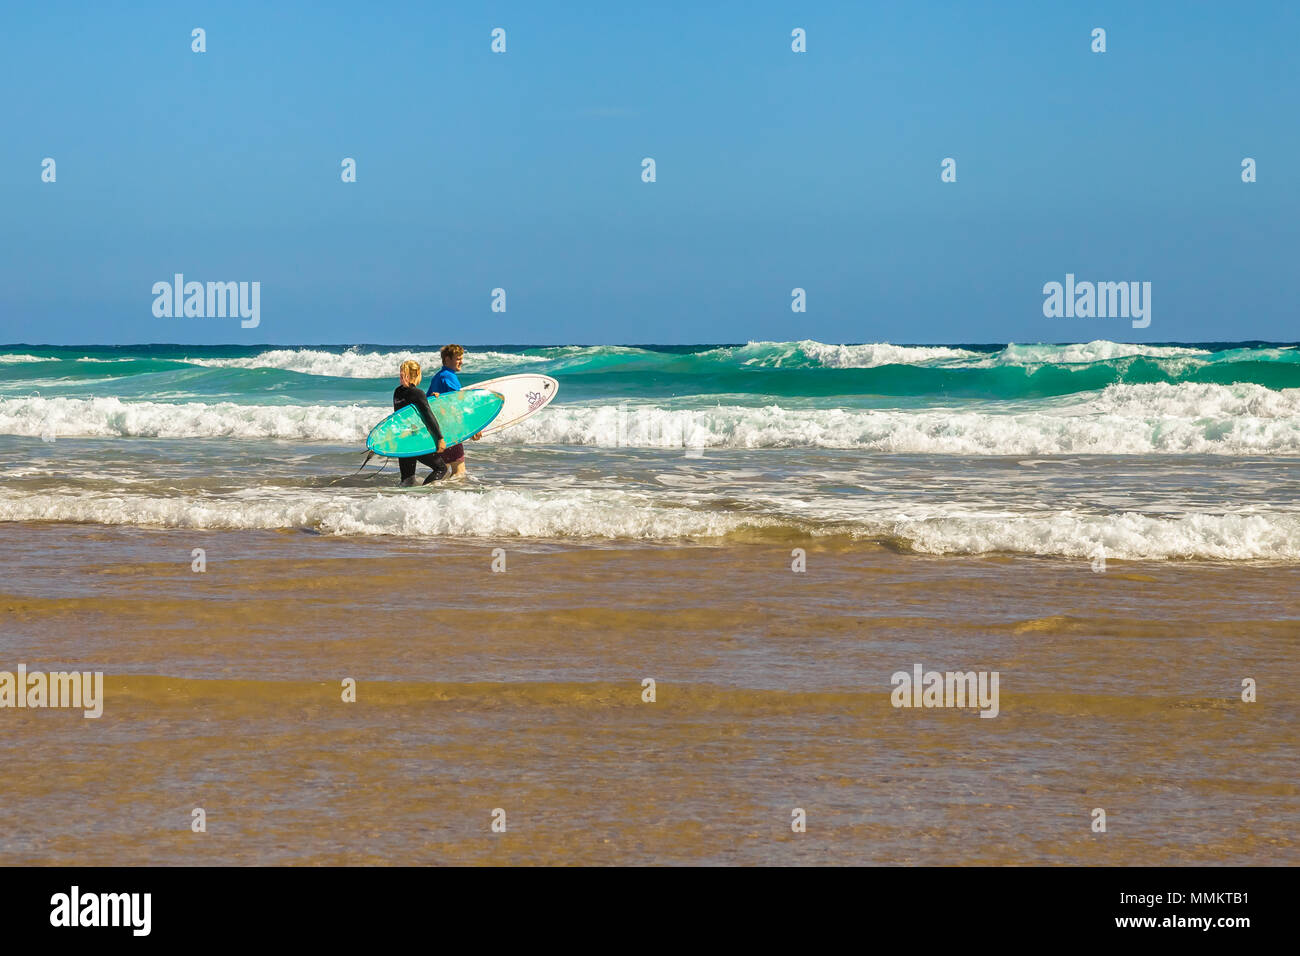 Phillip Island, Victoria, Australia - January 4, 2015: Two surfers holding surfboards at Woolamai Beach, Cape Woolamai State Faunal Reserve in summer Stock Photo